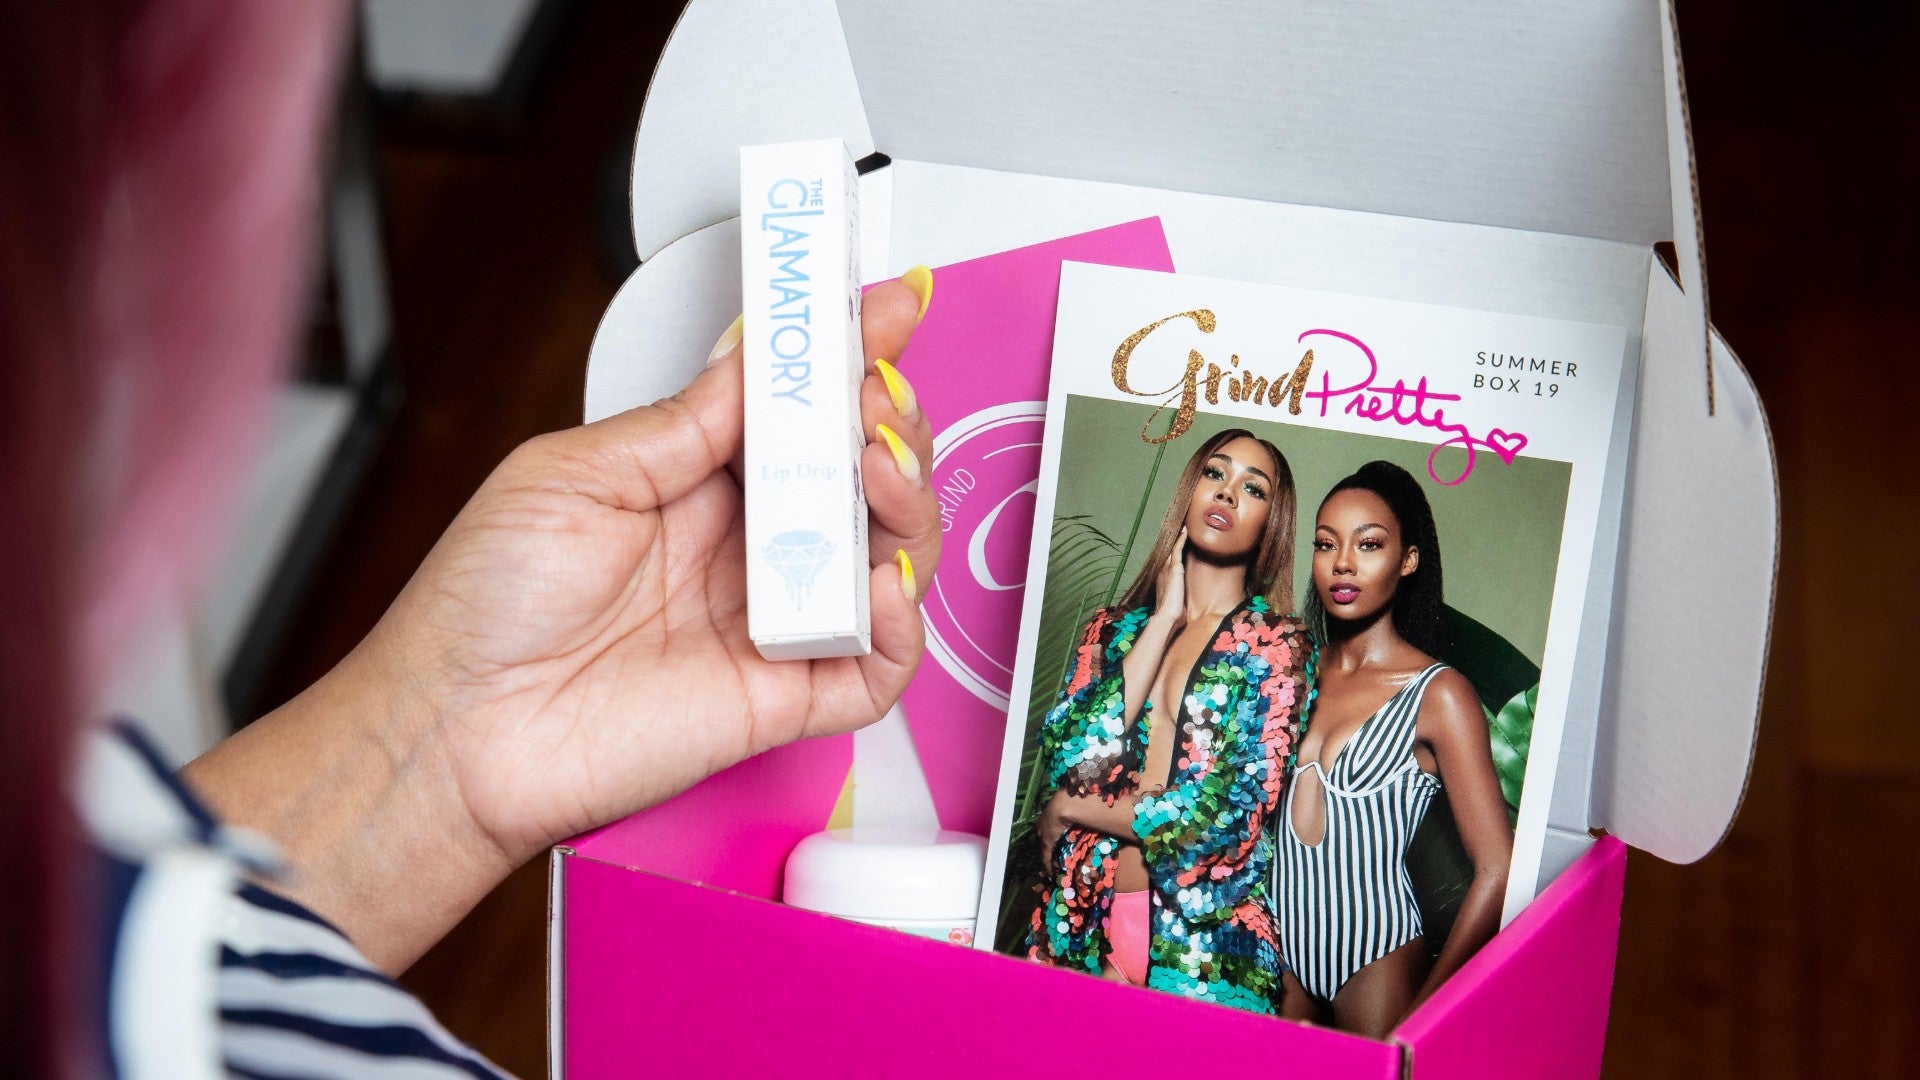 Grind Pretty Founder Mimi J. Pays It Forward With Platform And New Box Service